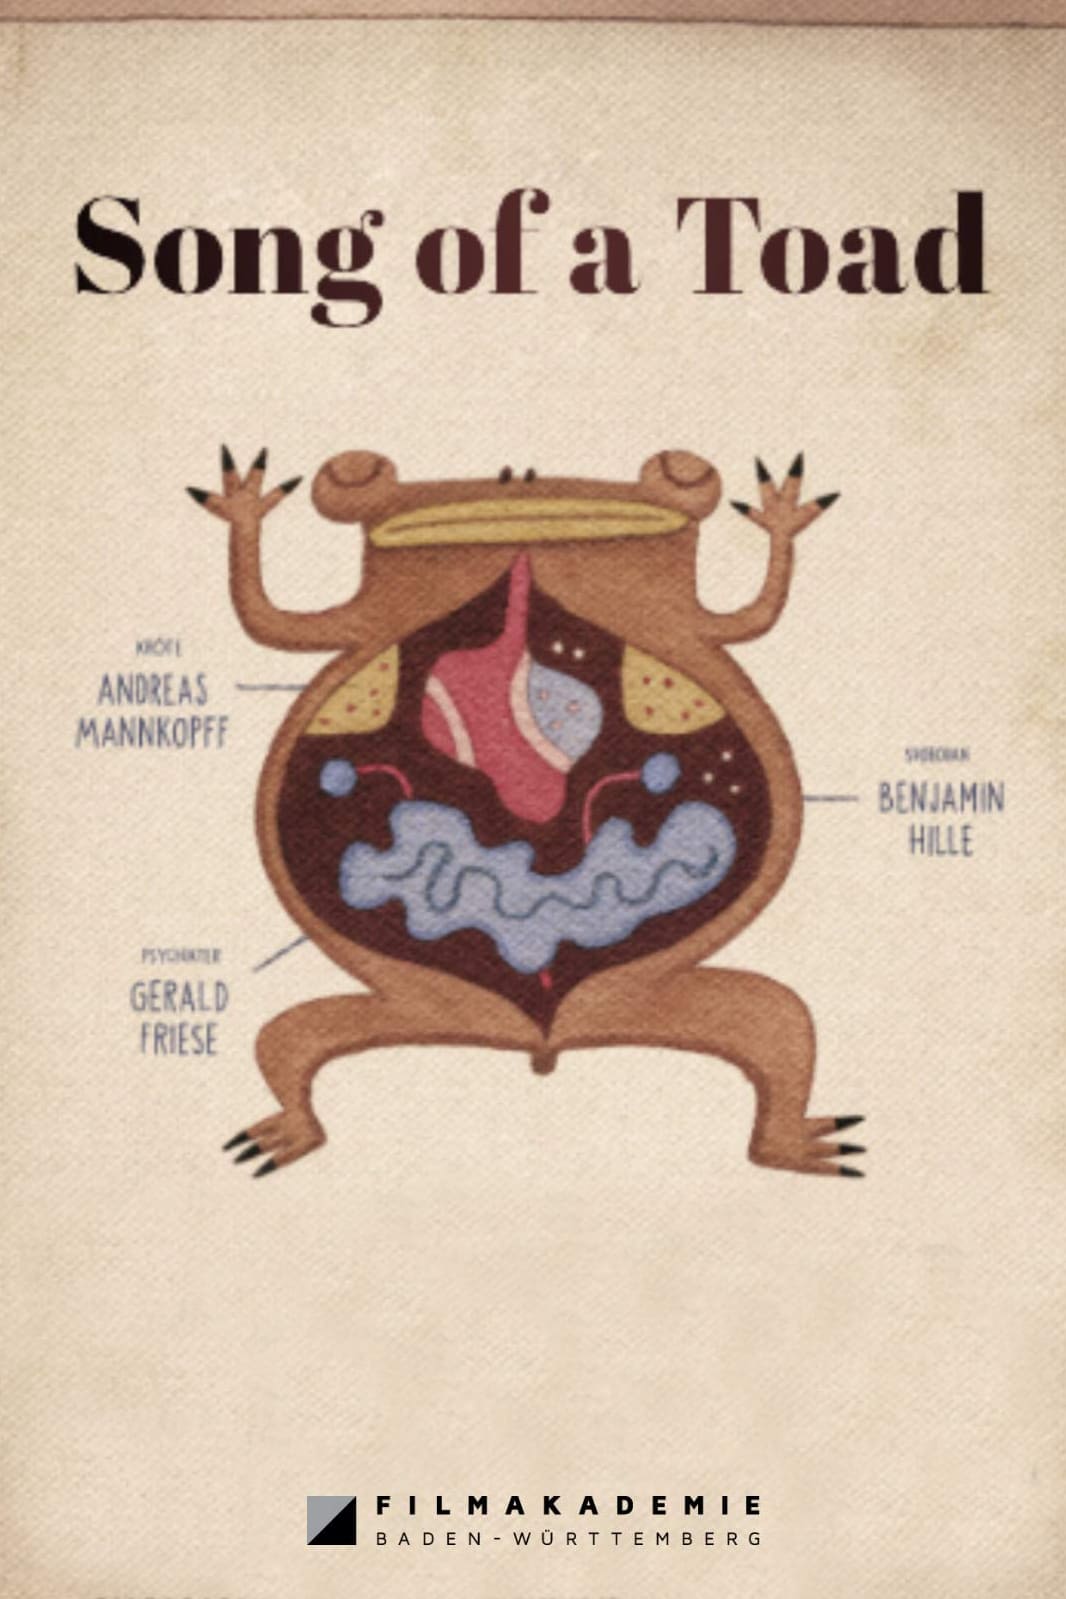 Song of a Toad